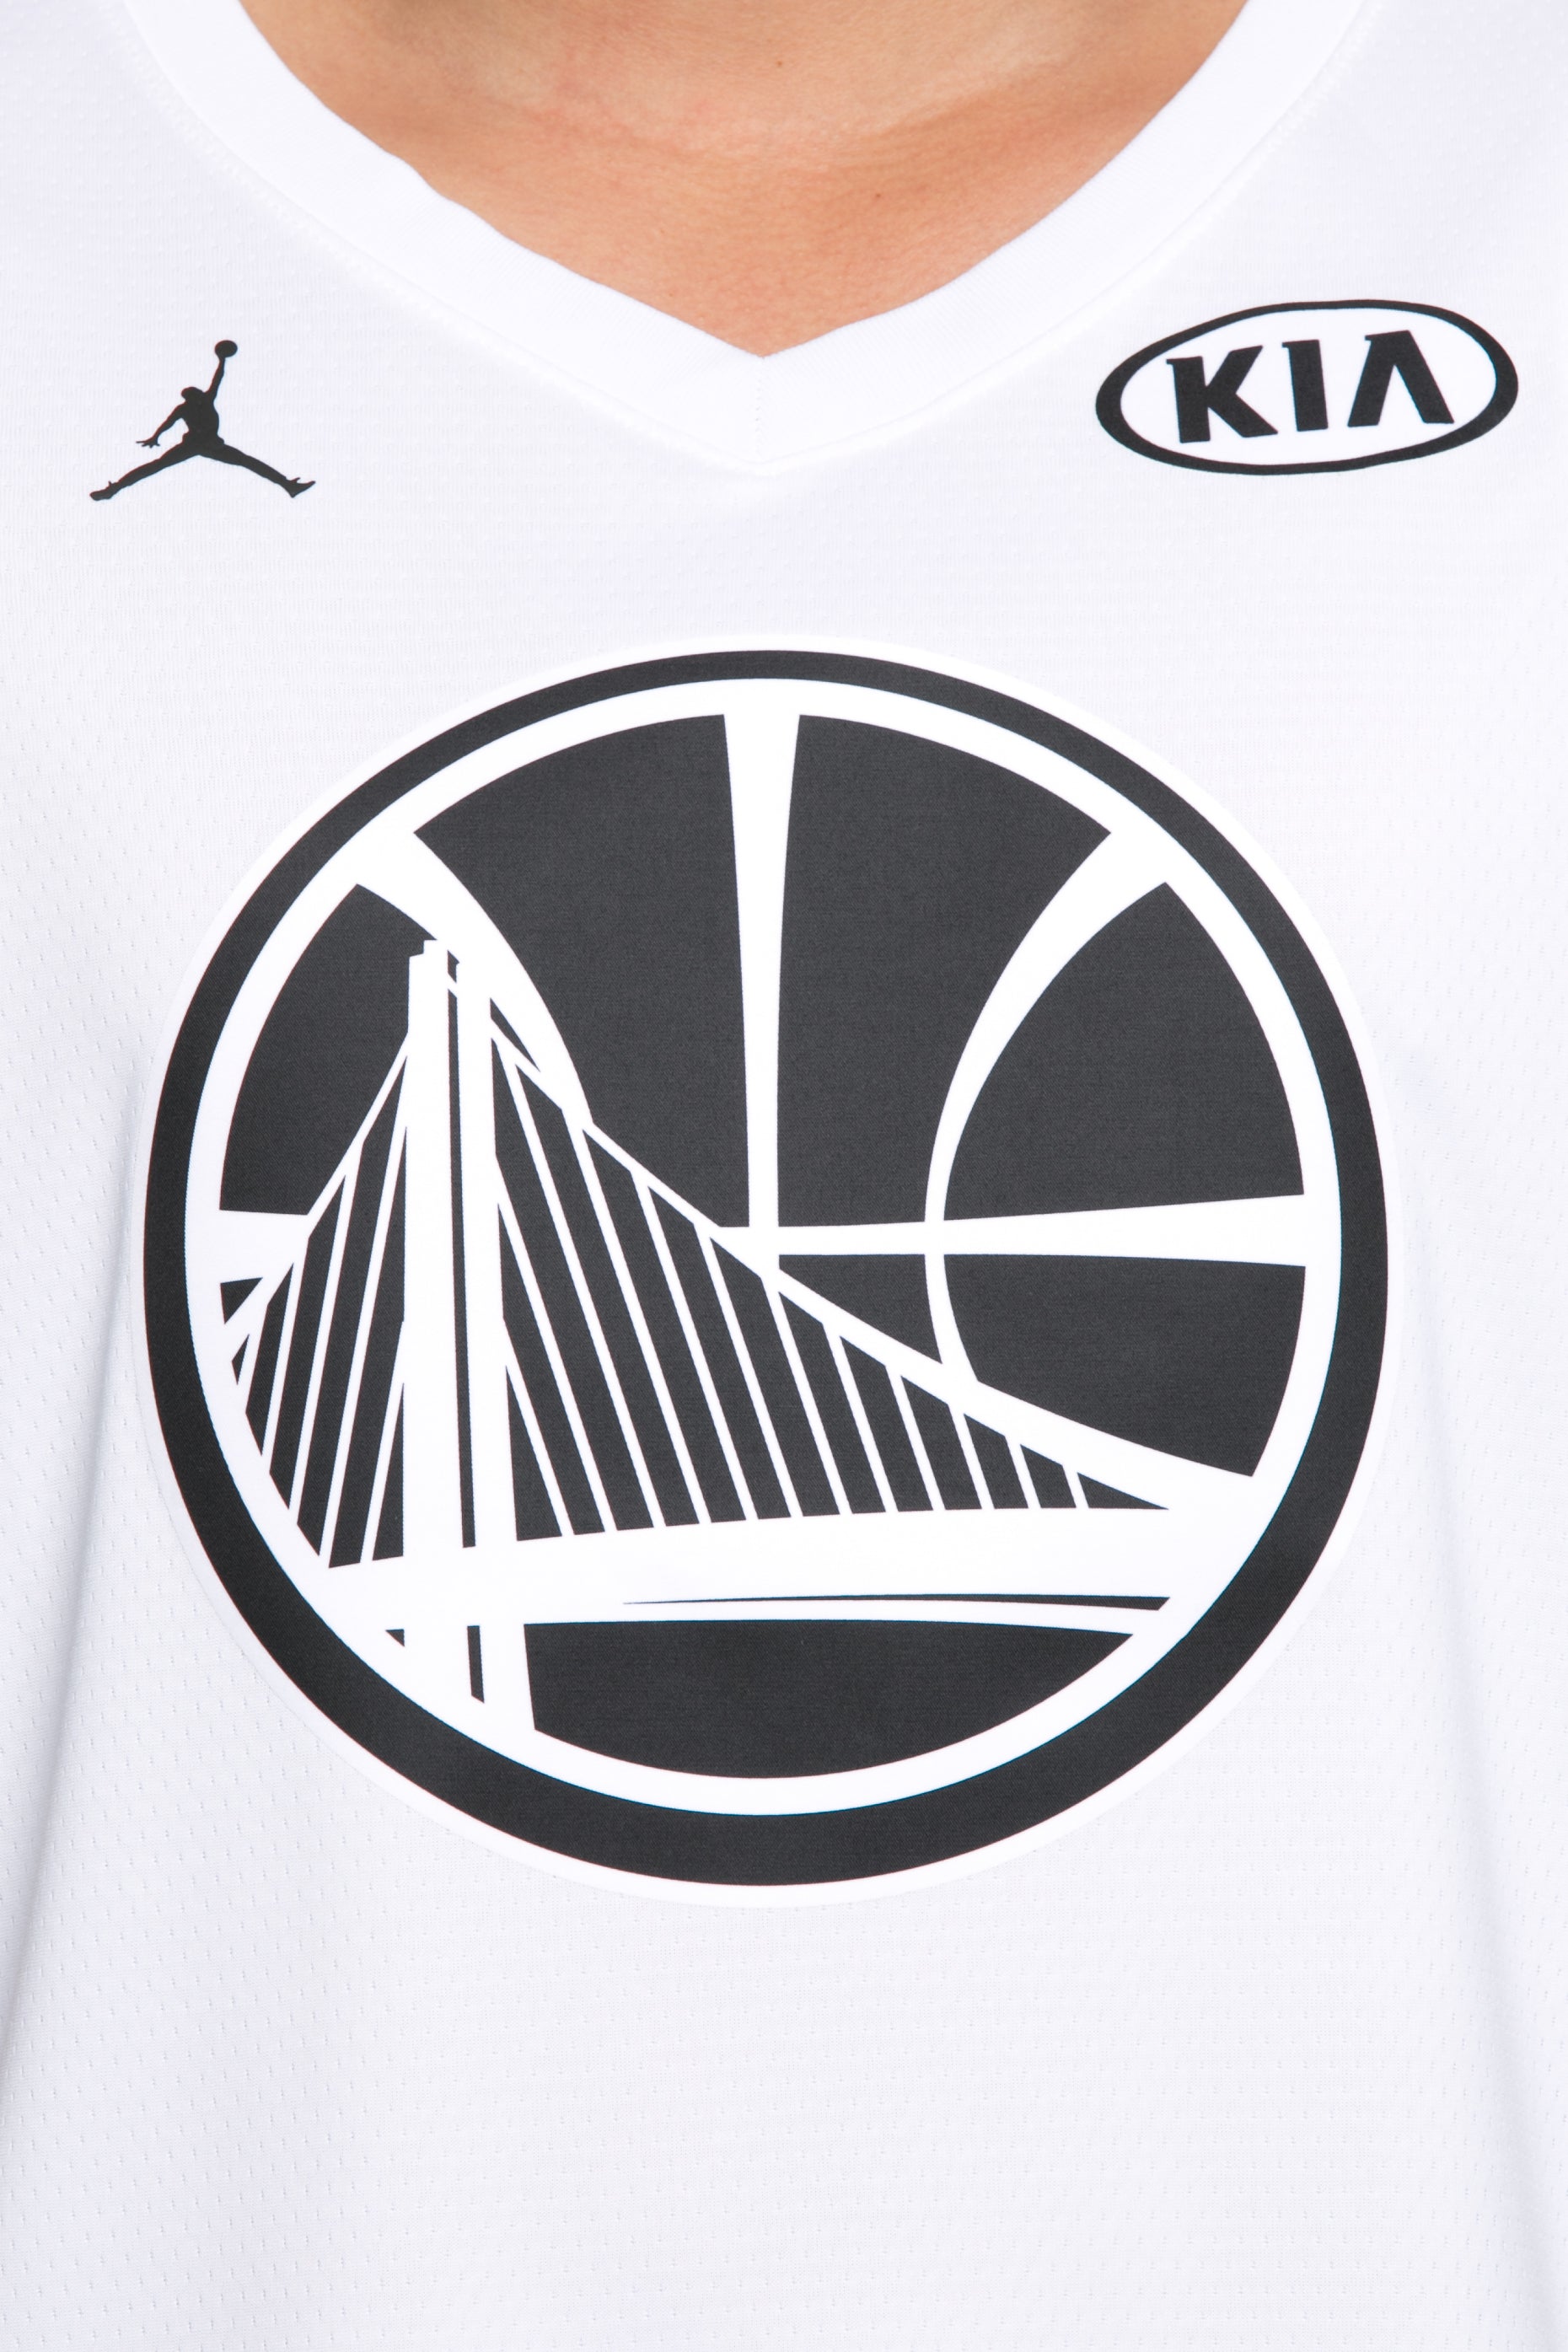 durant all star jersey